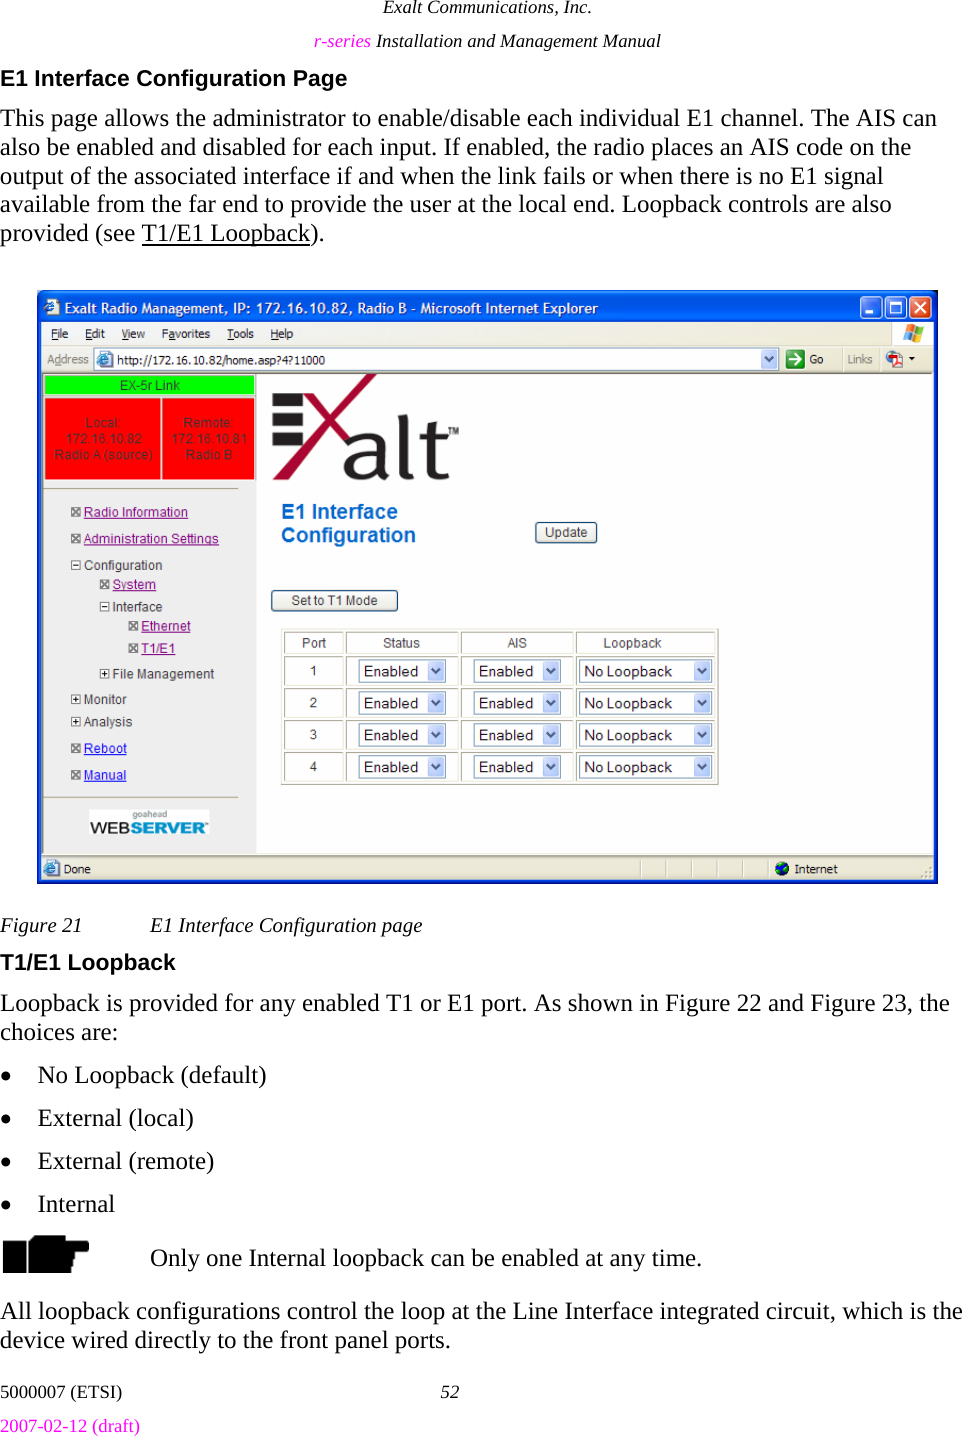 Exalt Communications, Inc. r-series Installation and Management Manual 5000007 (ETSI)  52 2007-02-12 (draft)  E1 Interface Configuration Page This page allows the administrator to enable/disable each individual E1 channel. The AIS can also be enabled and disabled for each input. If enabled, the radio places an AIS code on the output of the associated interface if and when the link fails or when there is no E1 signal available from the far end to provide the user at the local end. Loopback controls are also provided (see T1/E1 Loopback). Figure 21  E1 Interface Configuration page T1/E1 Loopback Loopback is provided for any enabled T1 or E1 port. As shown in Figure 22 and Figure 23, the choices are: • No Loopback (default) • External (local) • External (remote) • Internal Only one Internal loopback can be enabled at any time. All loopback configurations control the loop at the Line Interface integrated circuit, which is the device wired directly to the front panel ports. 